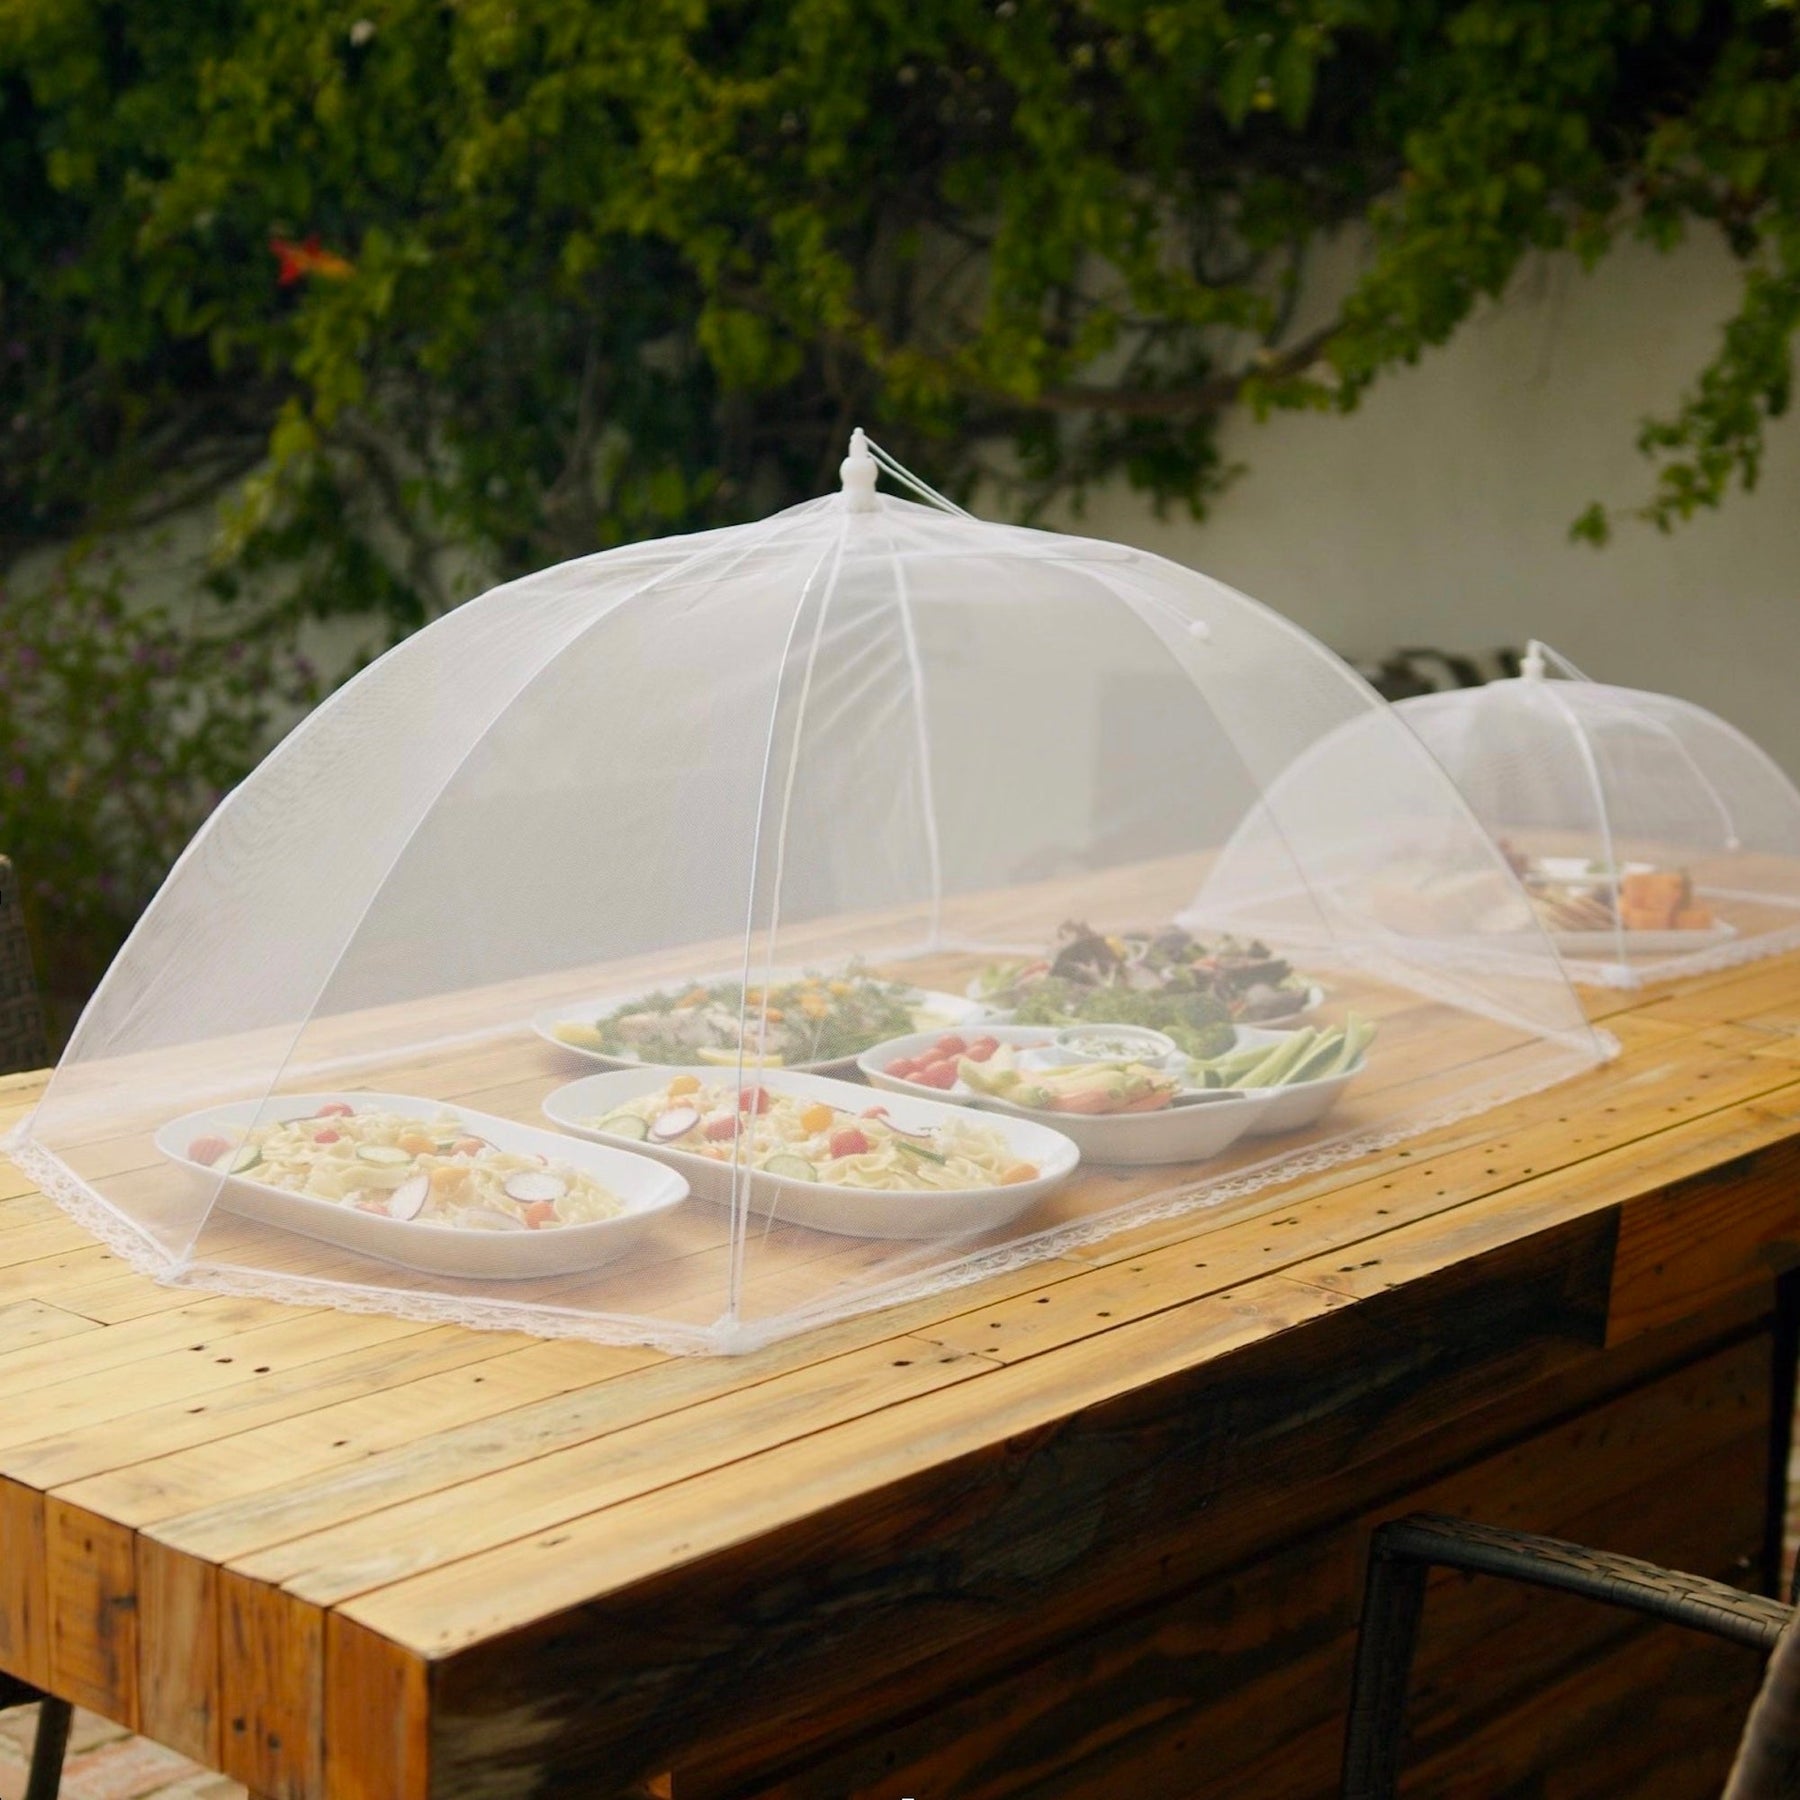 6pk Pop-Up 17x17” Large Outdoor Food Covers - Keep Bugs Out